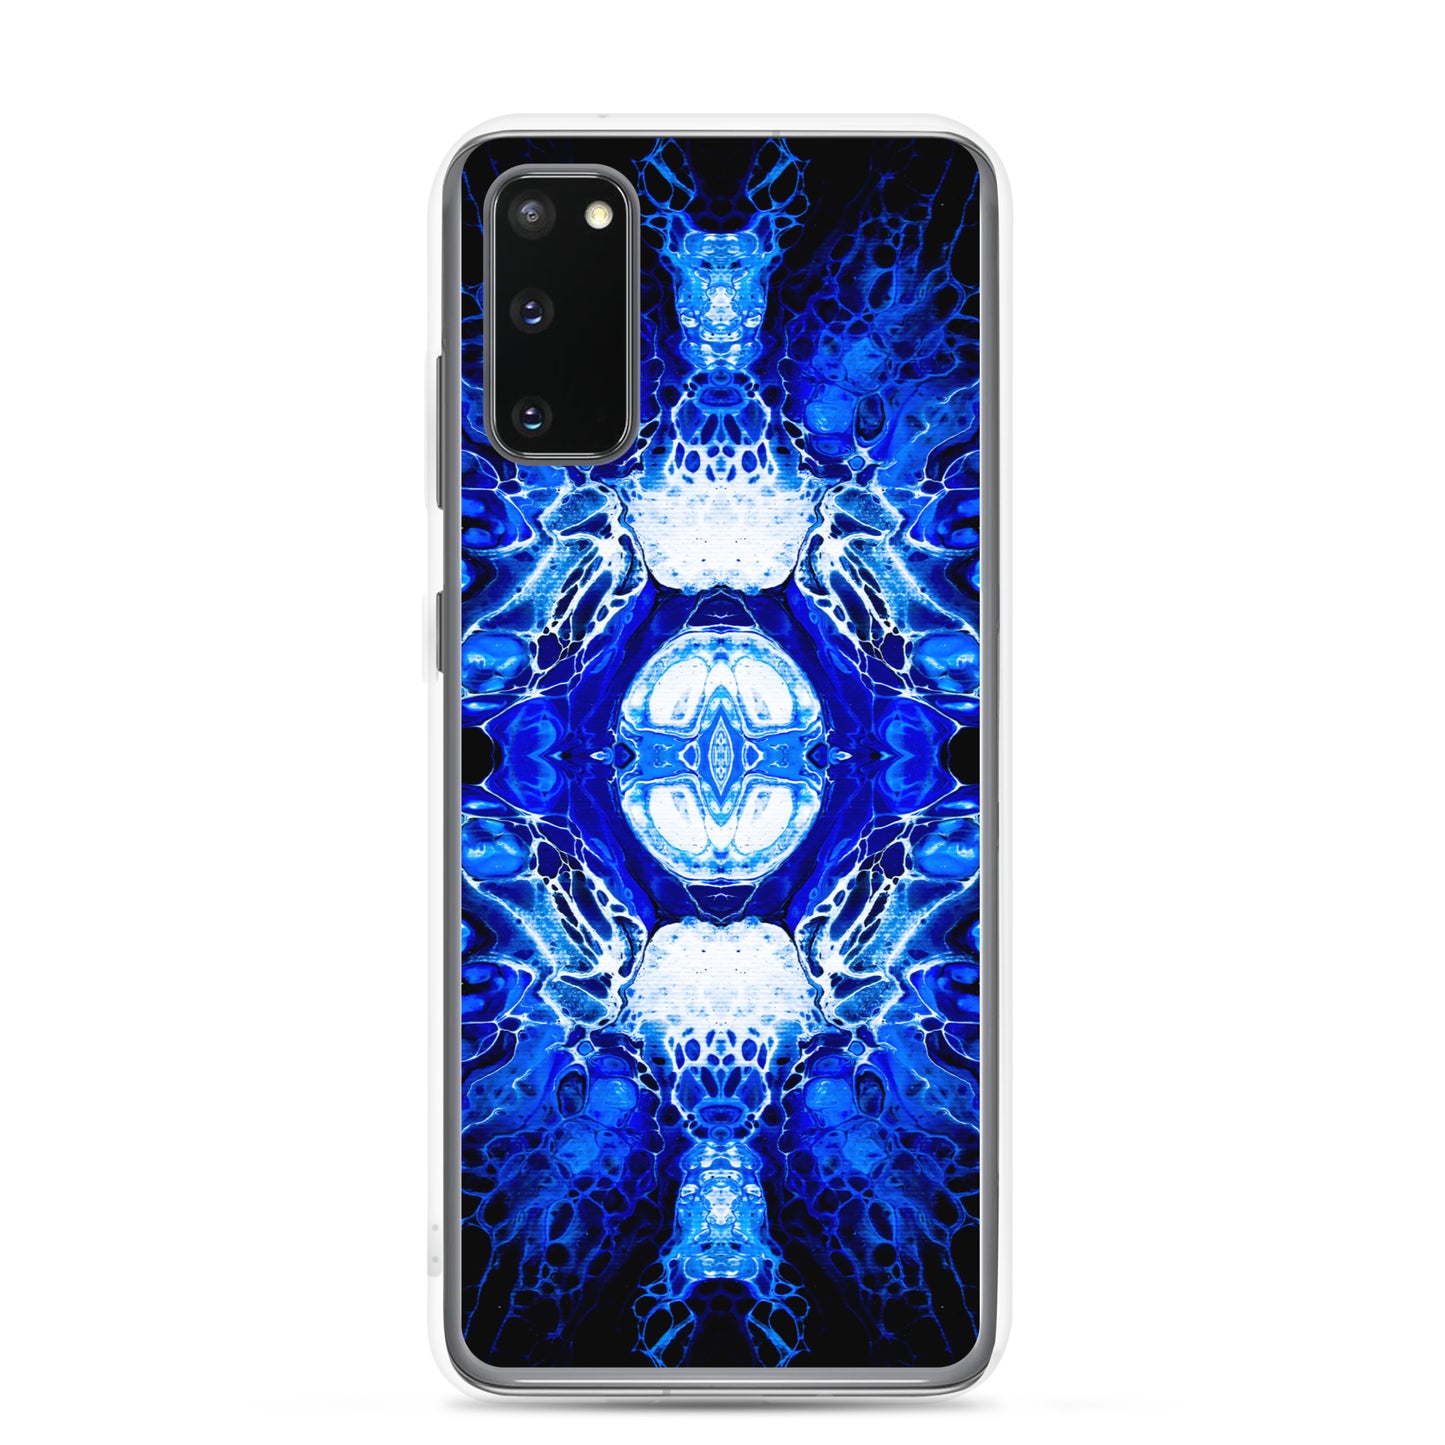 NightOwl Studio Custom Phone Case Compatible with Samsung Galaxy, Slim Cover for Wireless Charging, Drop and Scratch Resistant, Blue Nucleus